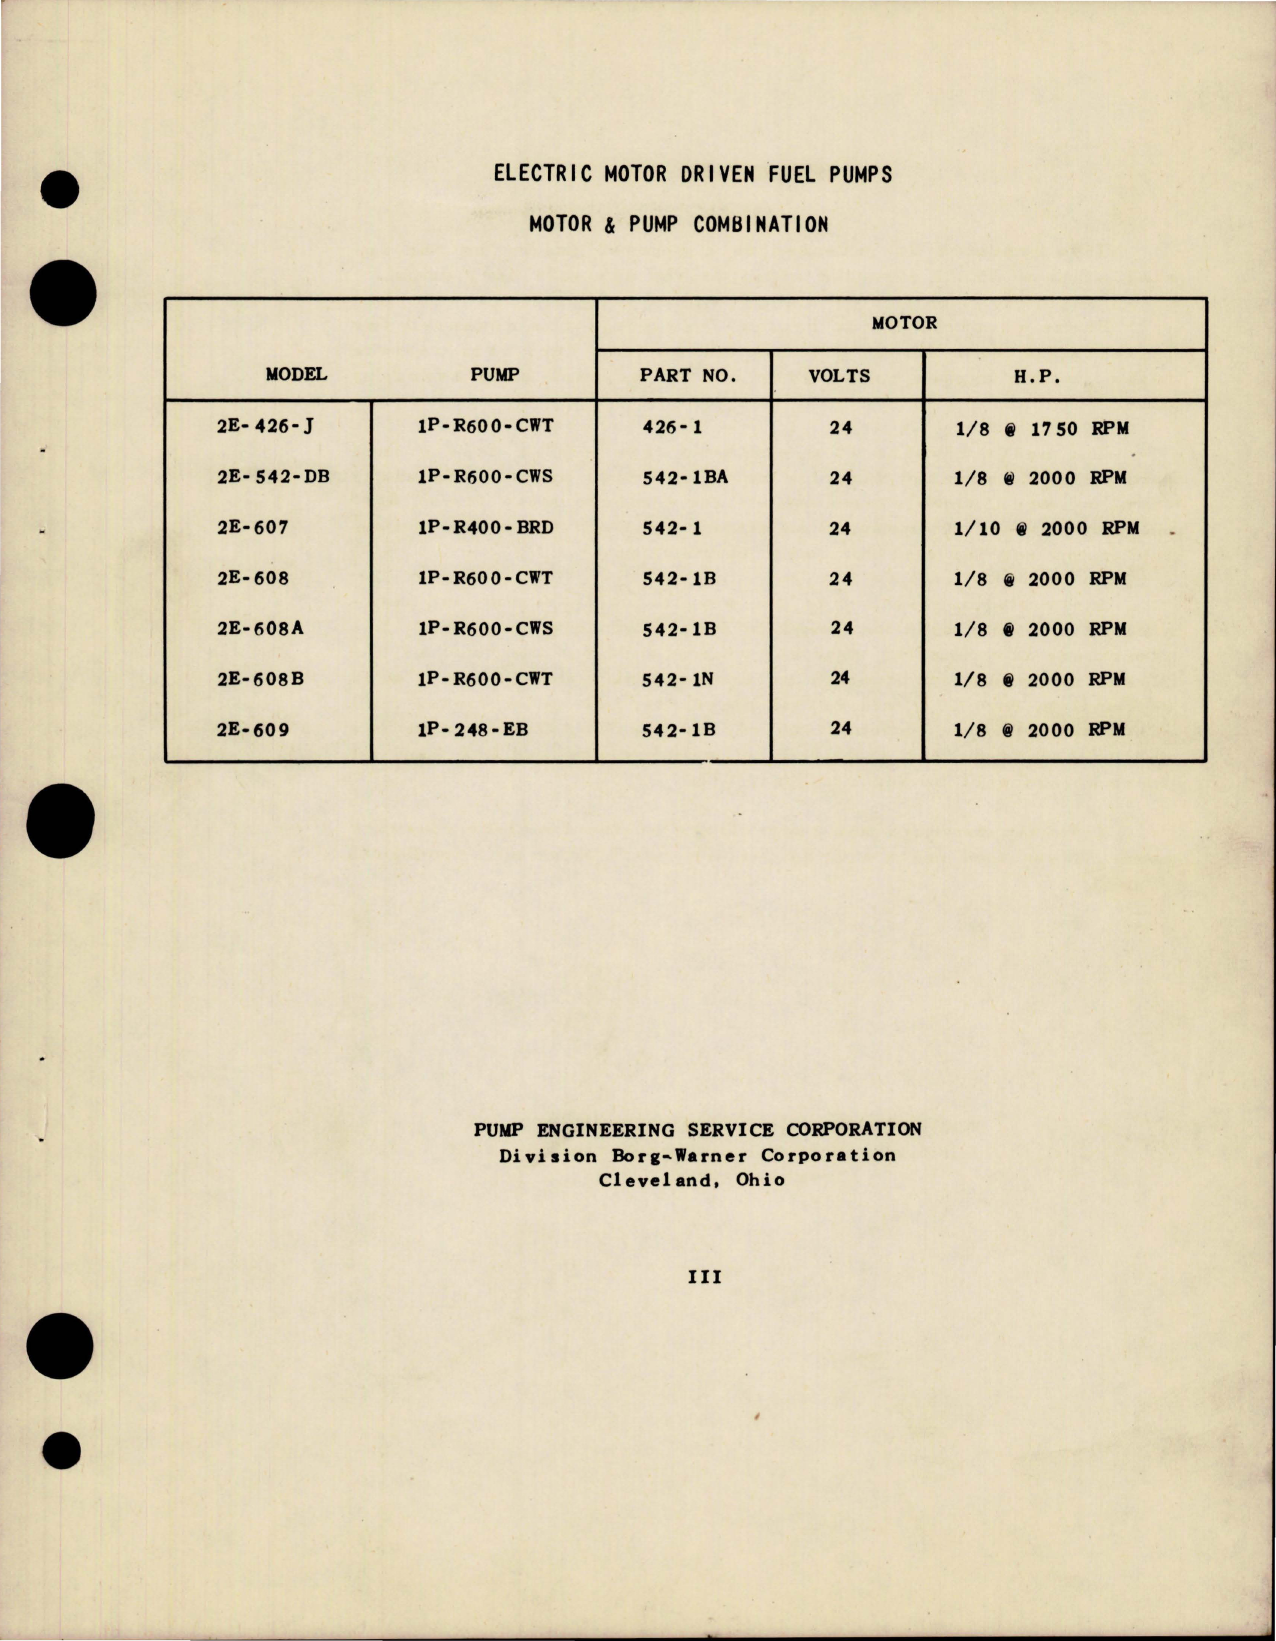 Sample page 5 from AirCorps Library document: Operation, Service, and Overhaul Instructions with Parts for Electric Motor Driven Fuel Pumps 